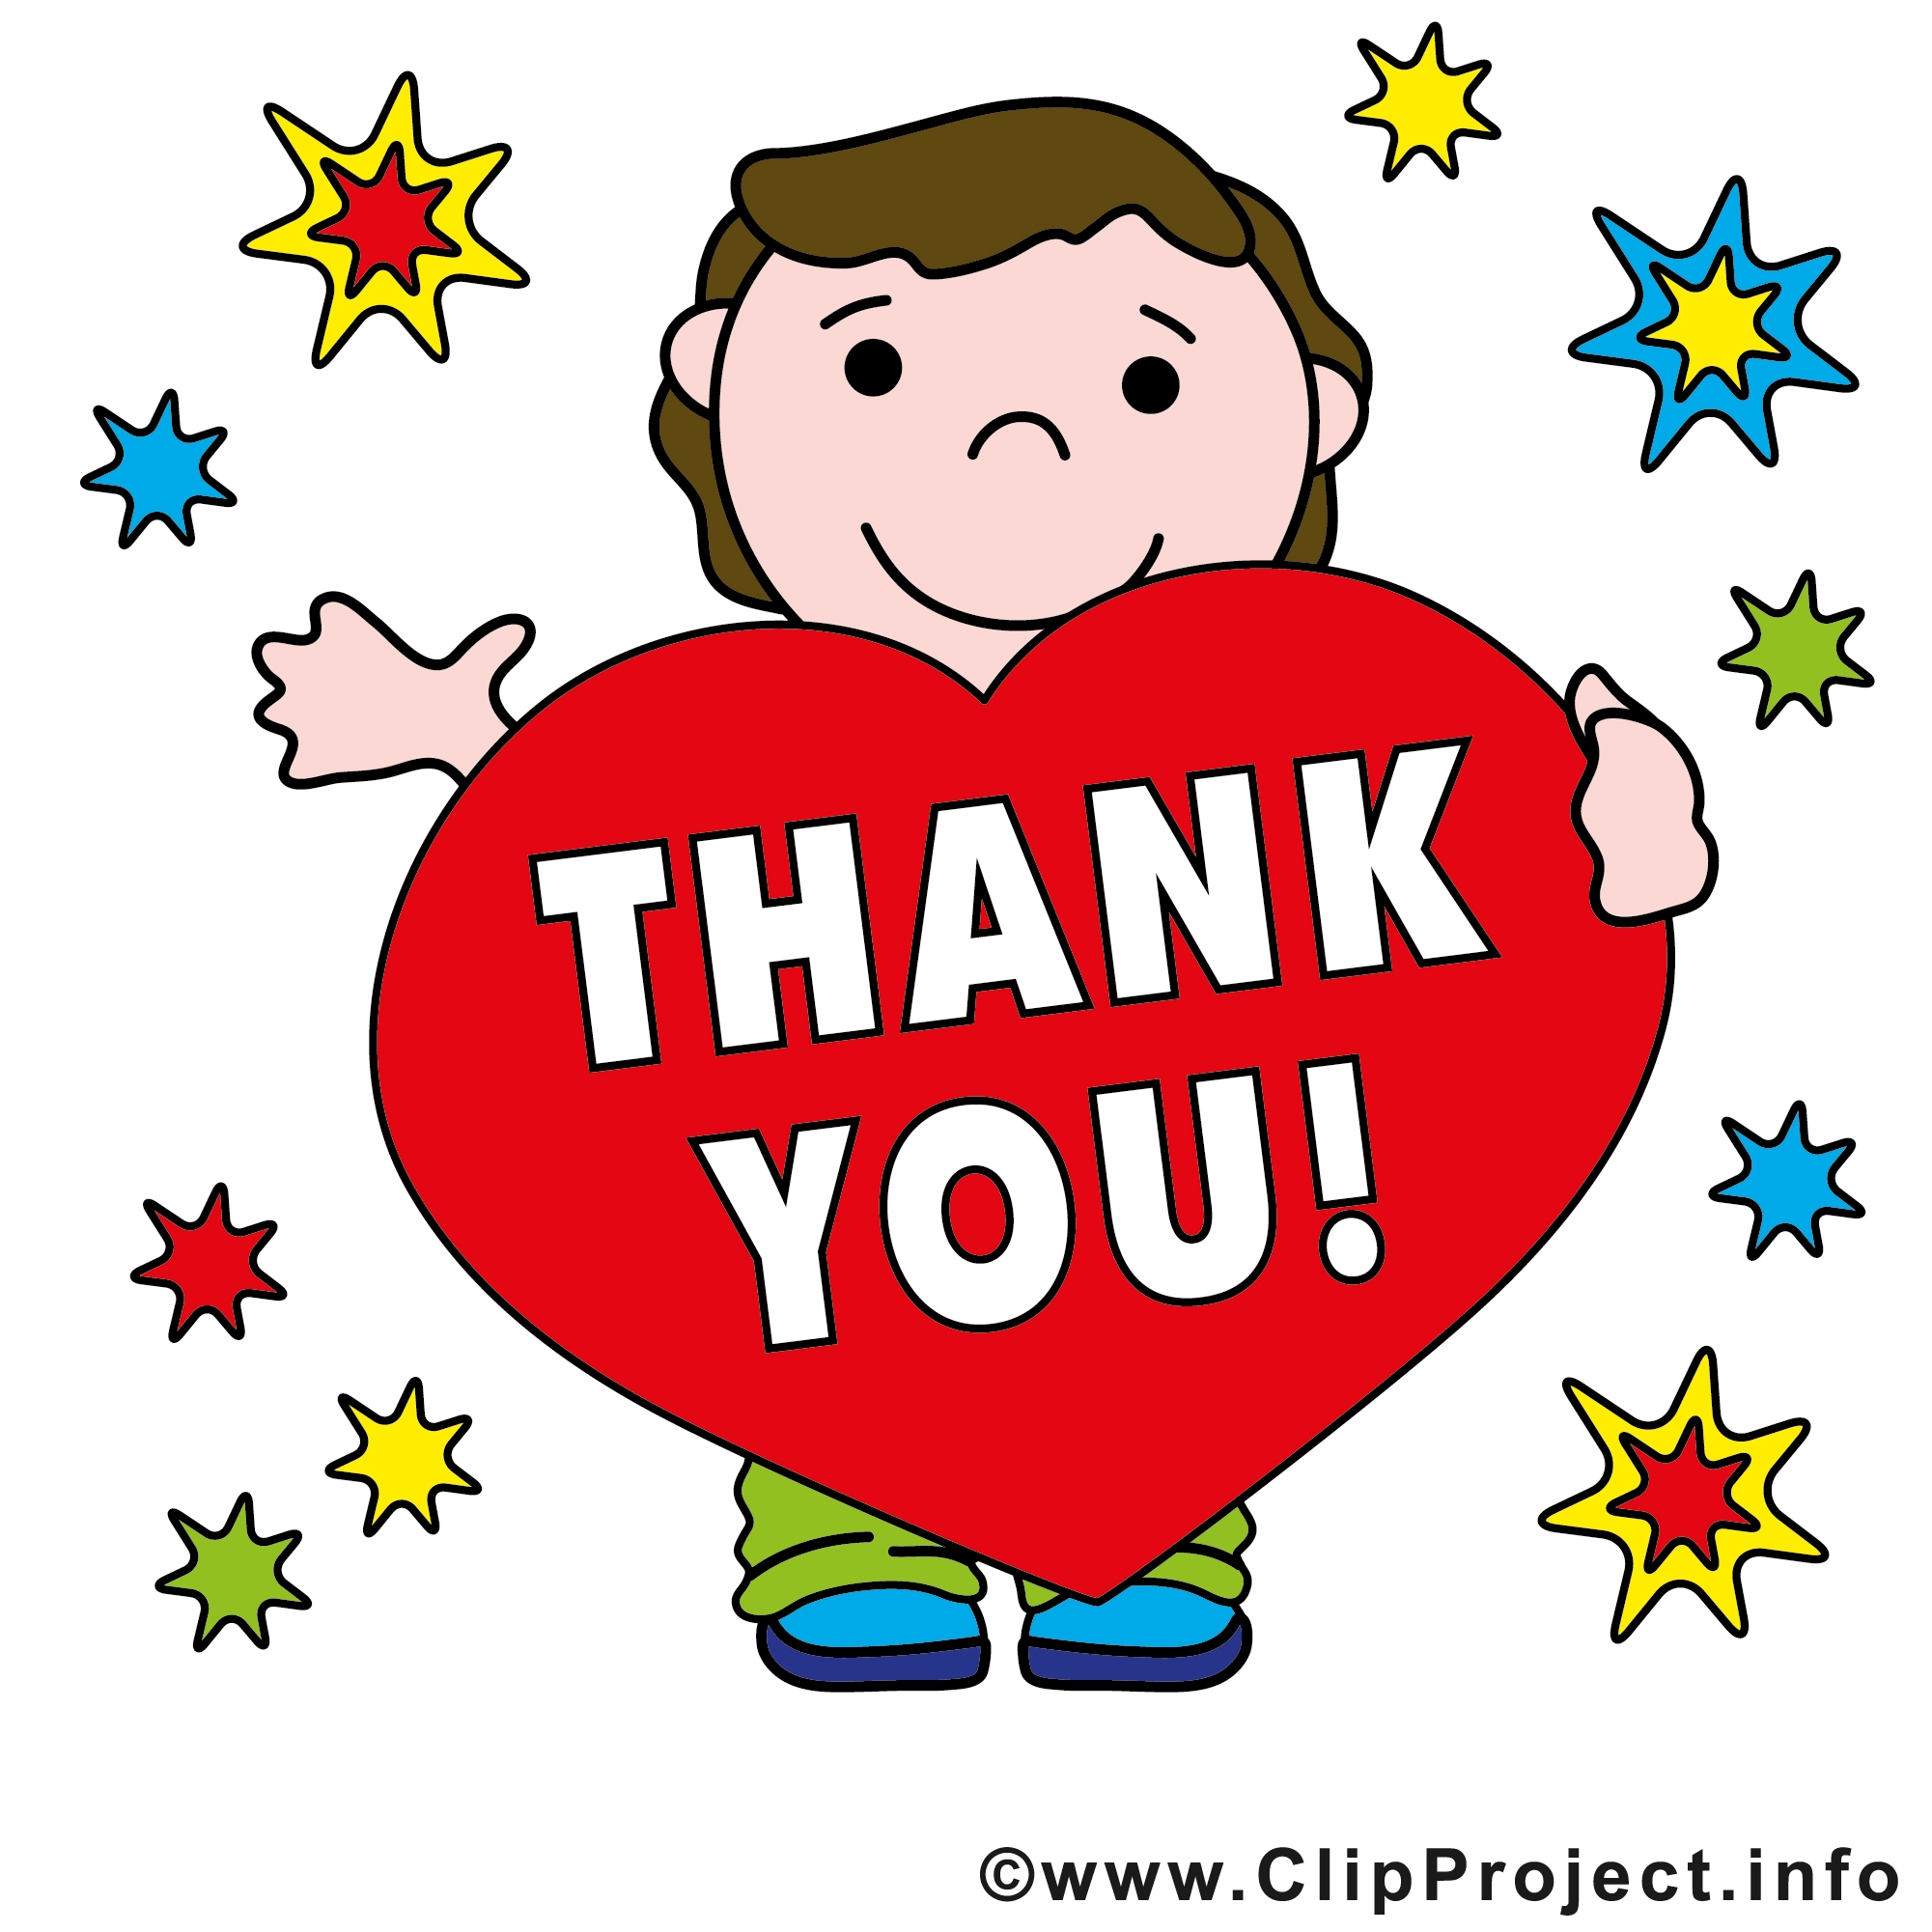 Clipart Of Thank You